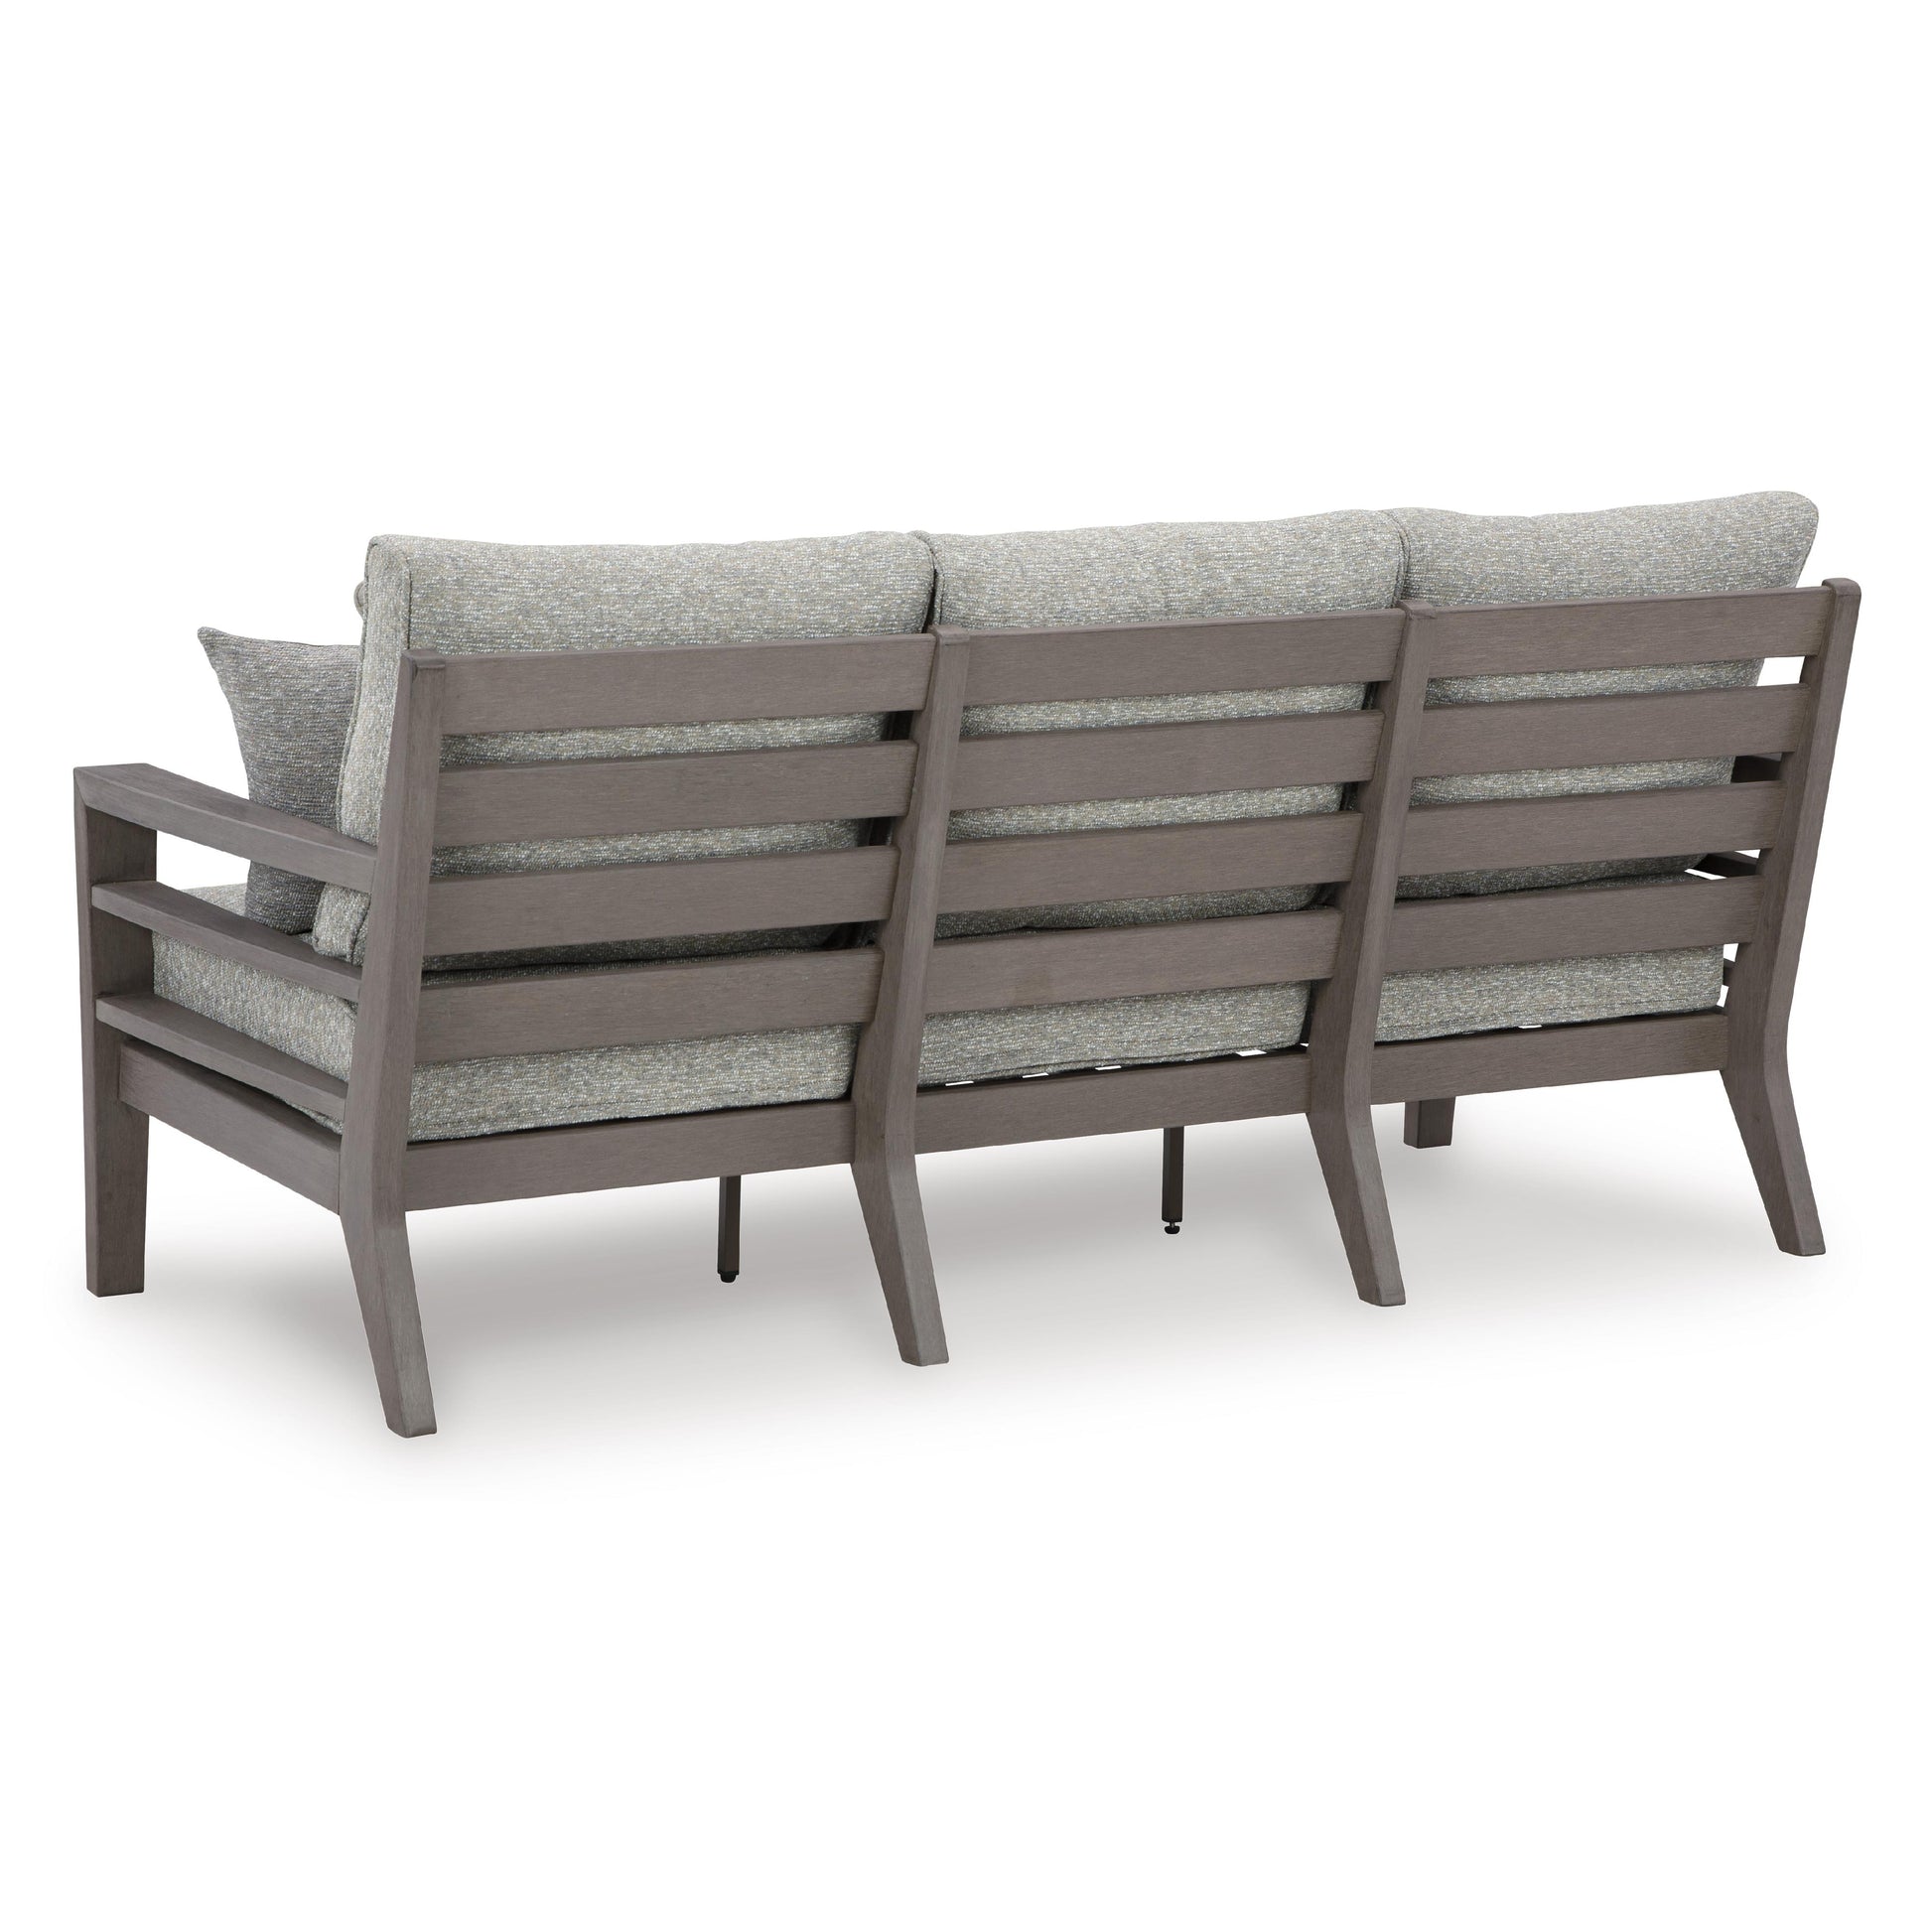 Signature Design by Ashley Outdoor Seating Sofas P564-838 IMAGE 4